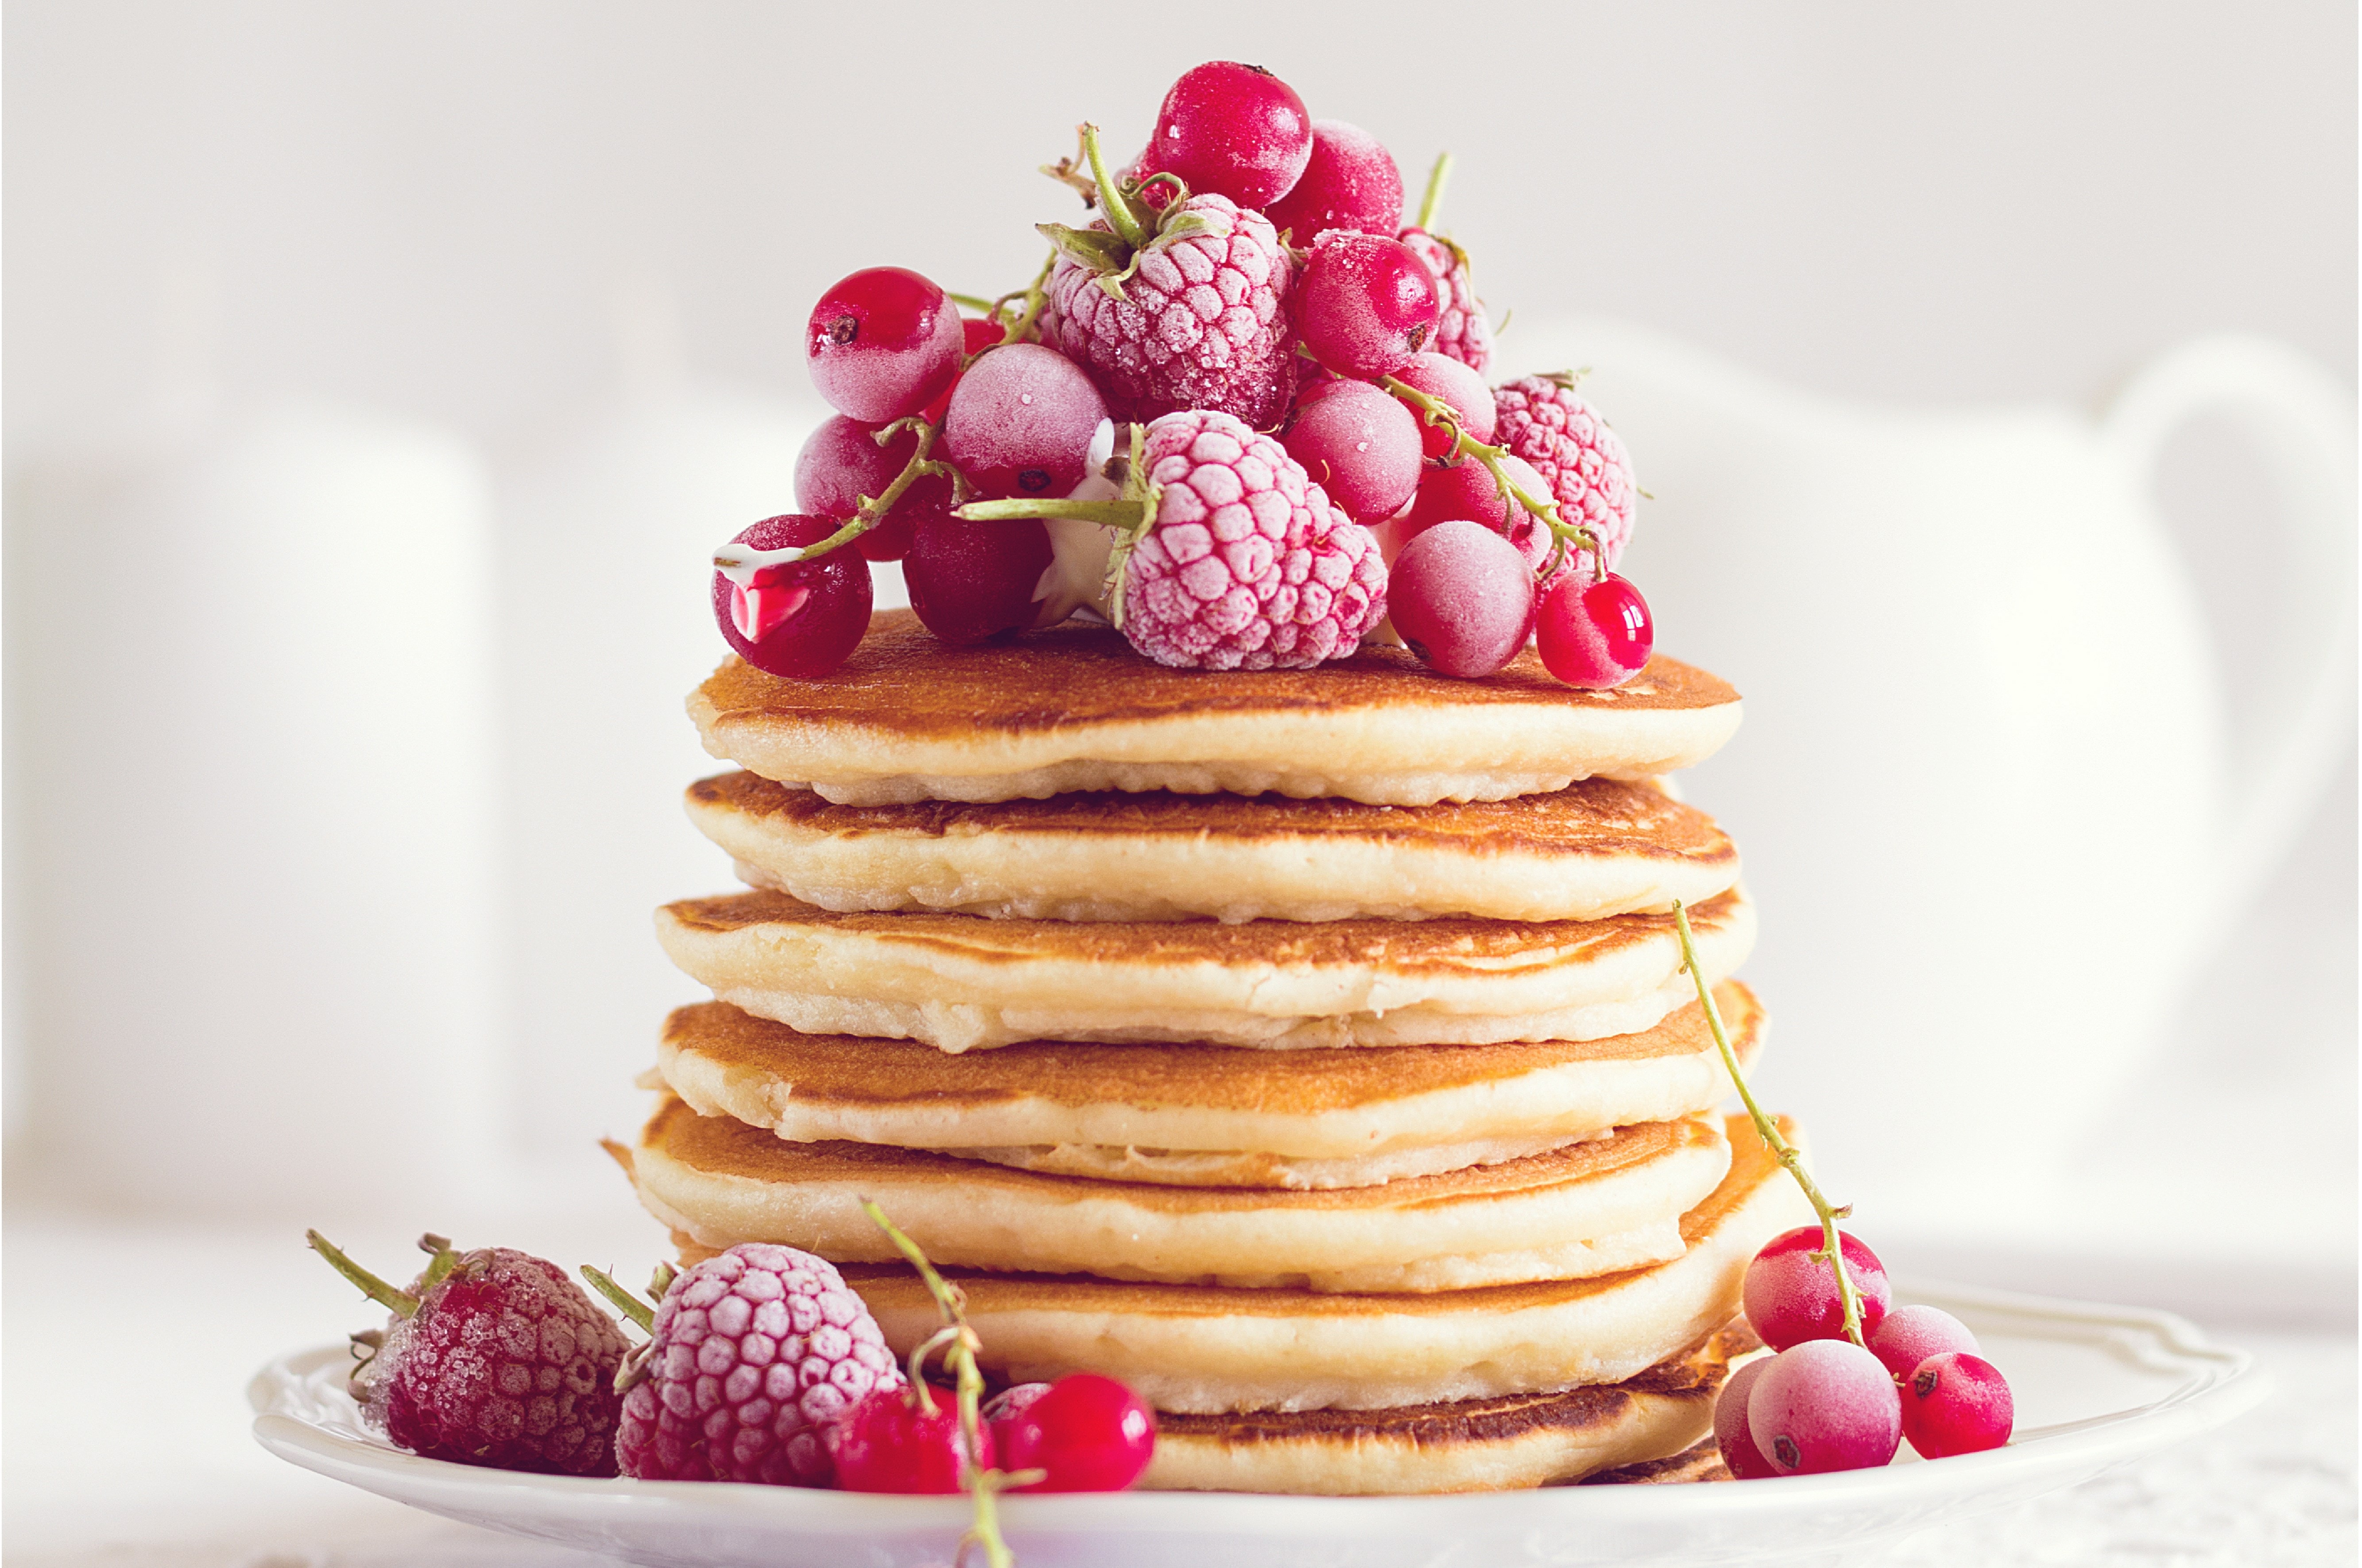 Pancakes with fresh berries 